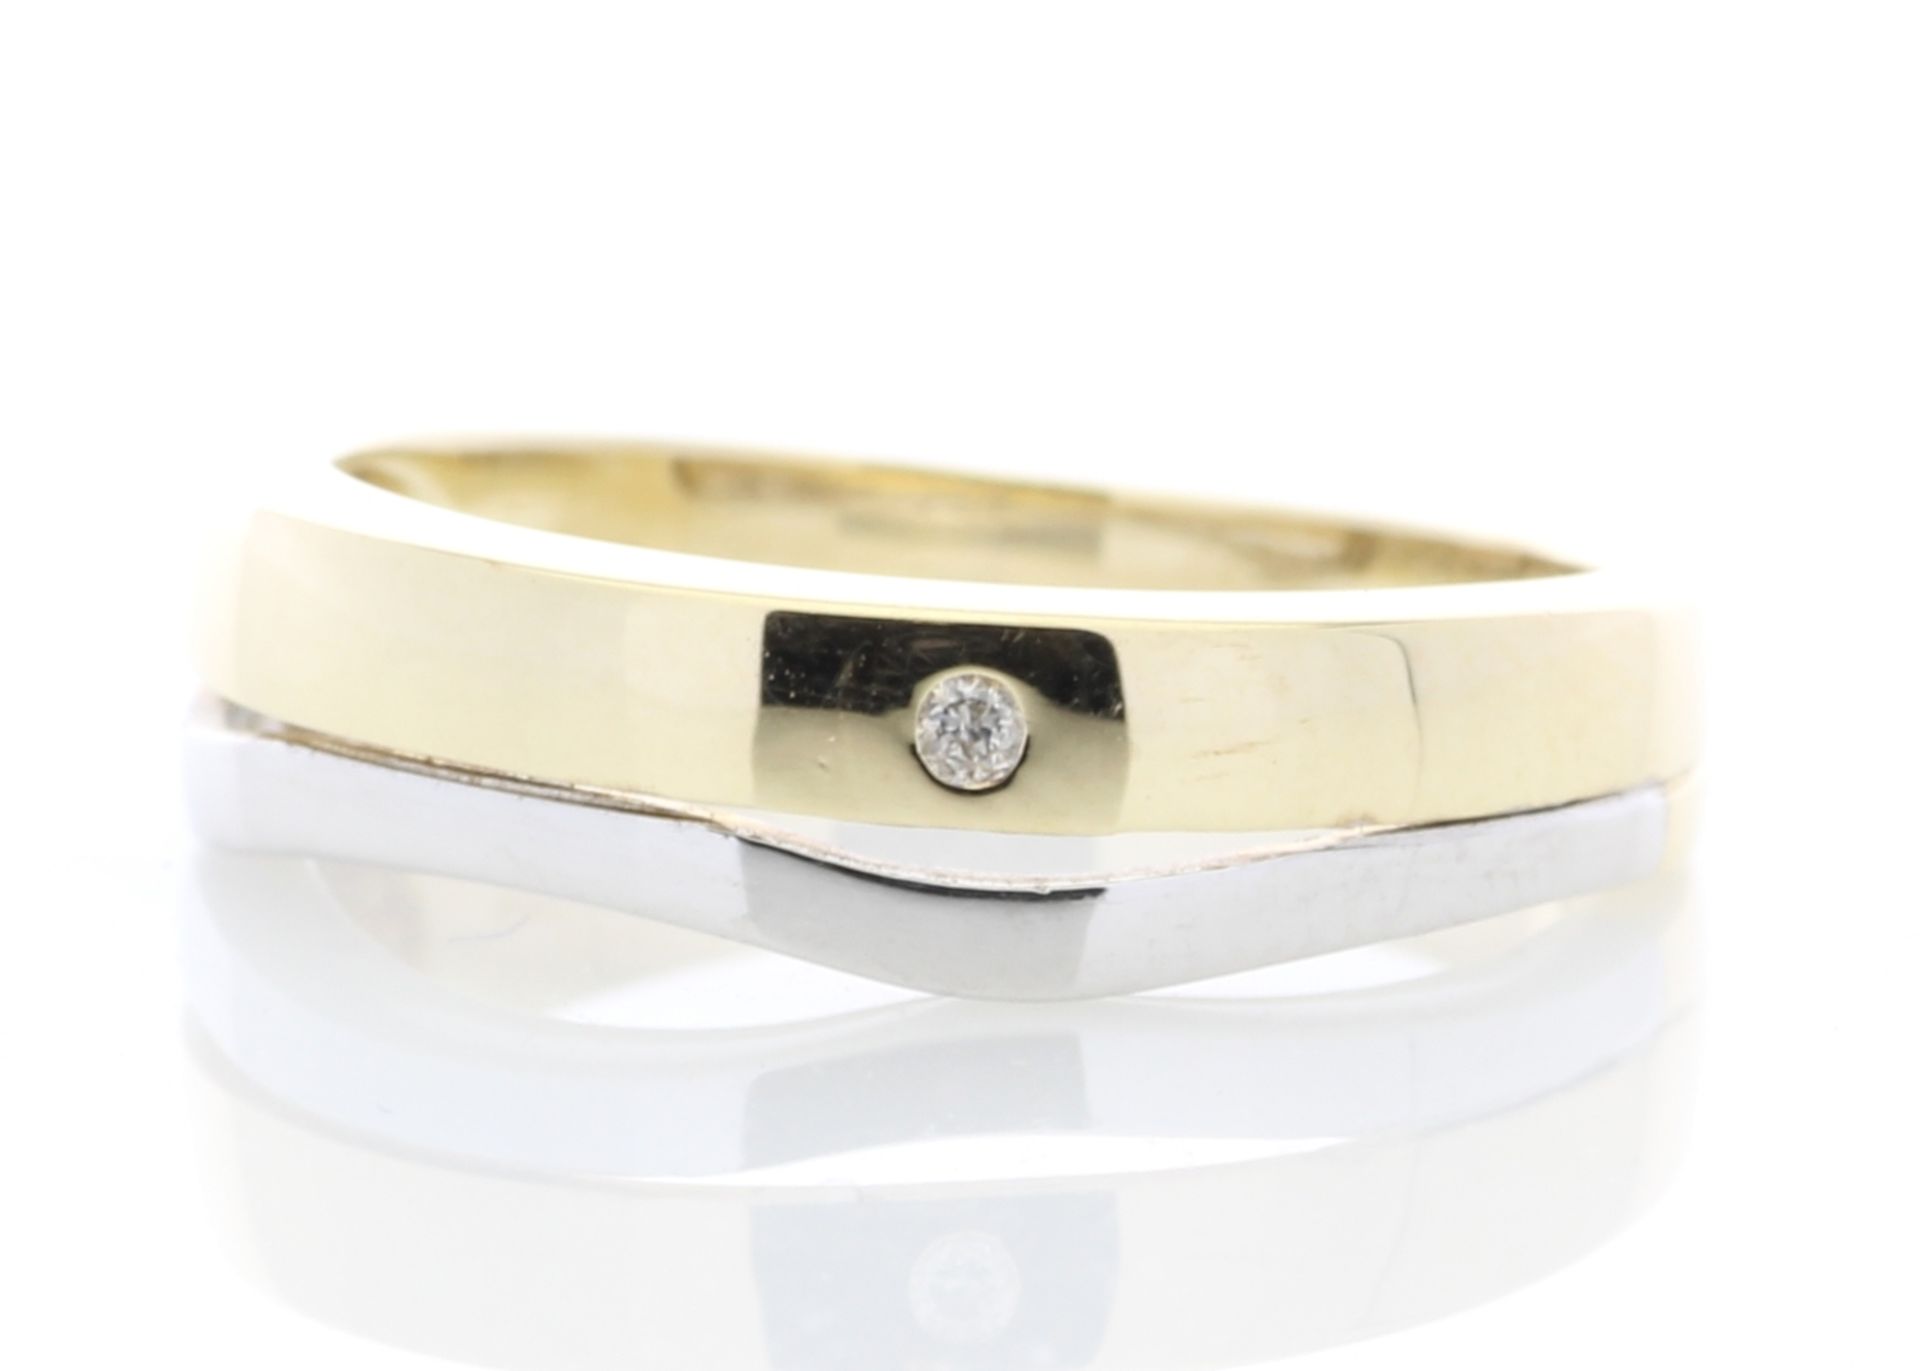 9ct Yellow Gold Single Stone Rub Over Set Diamond Ring 0.01 Carats - Valued by GIE £1,520.00 - A